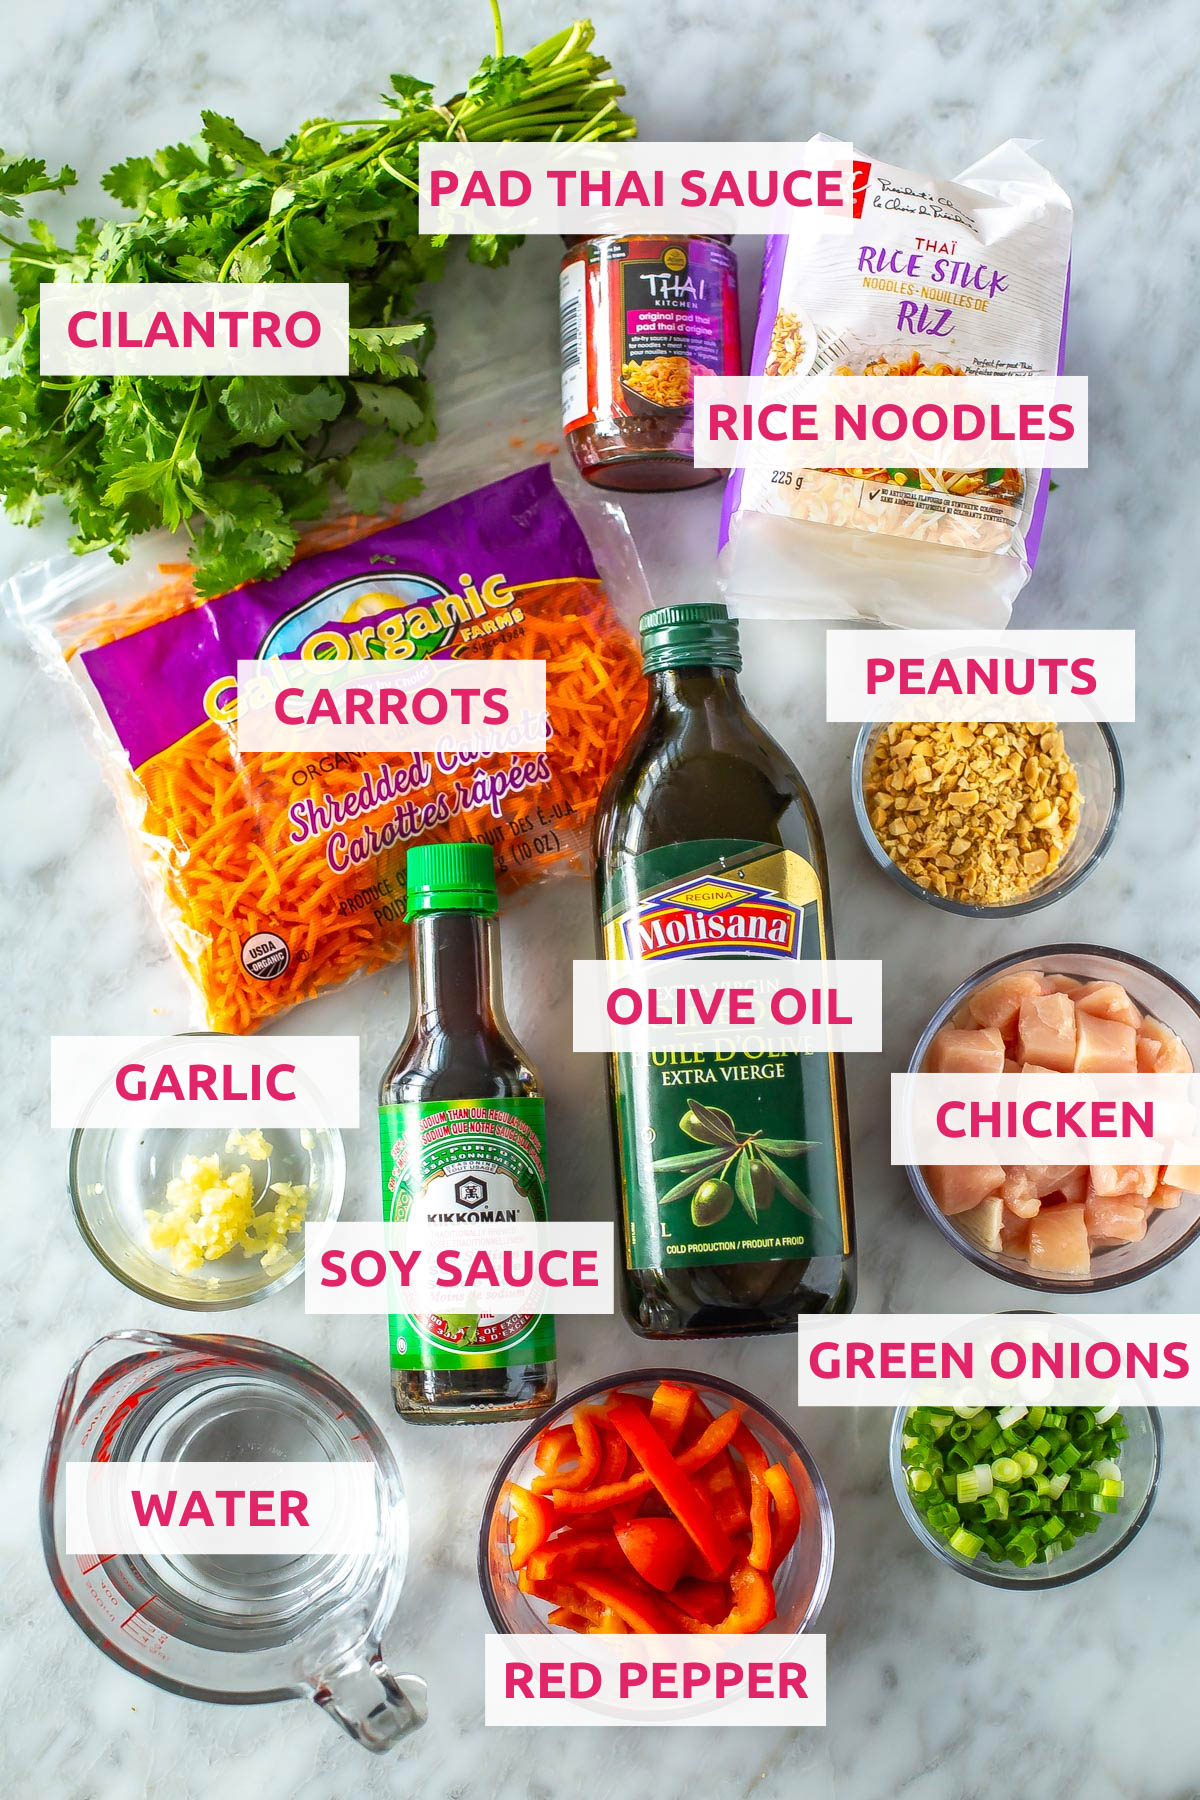 Ingredients for Instant Pot chicken pad thai: Pad Thai sauce, cilantro, rice noodles, carrots, peanuts, garlic, soy sauce, olive oil, chicken, water, red peppers and green onions.